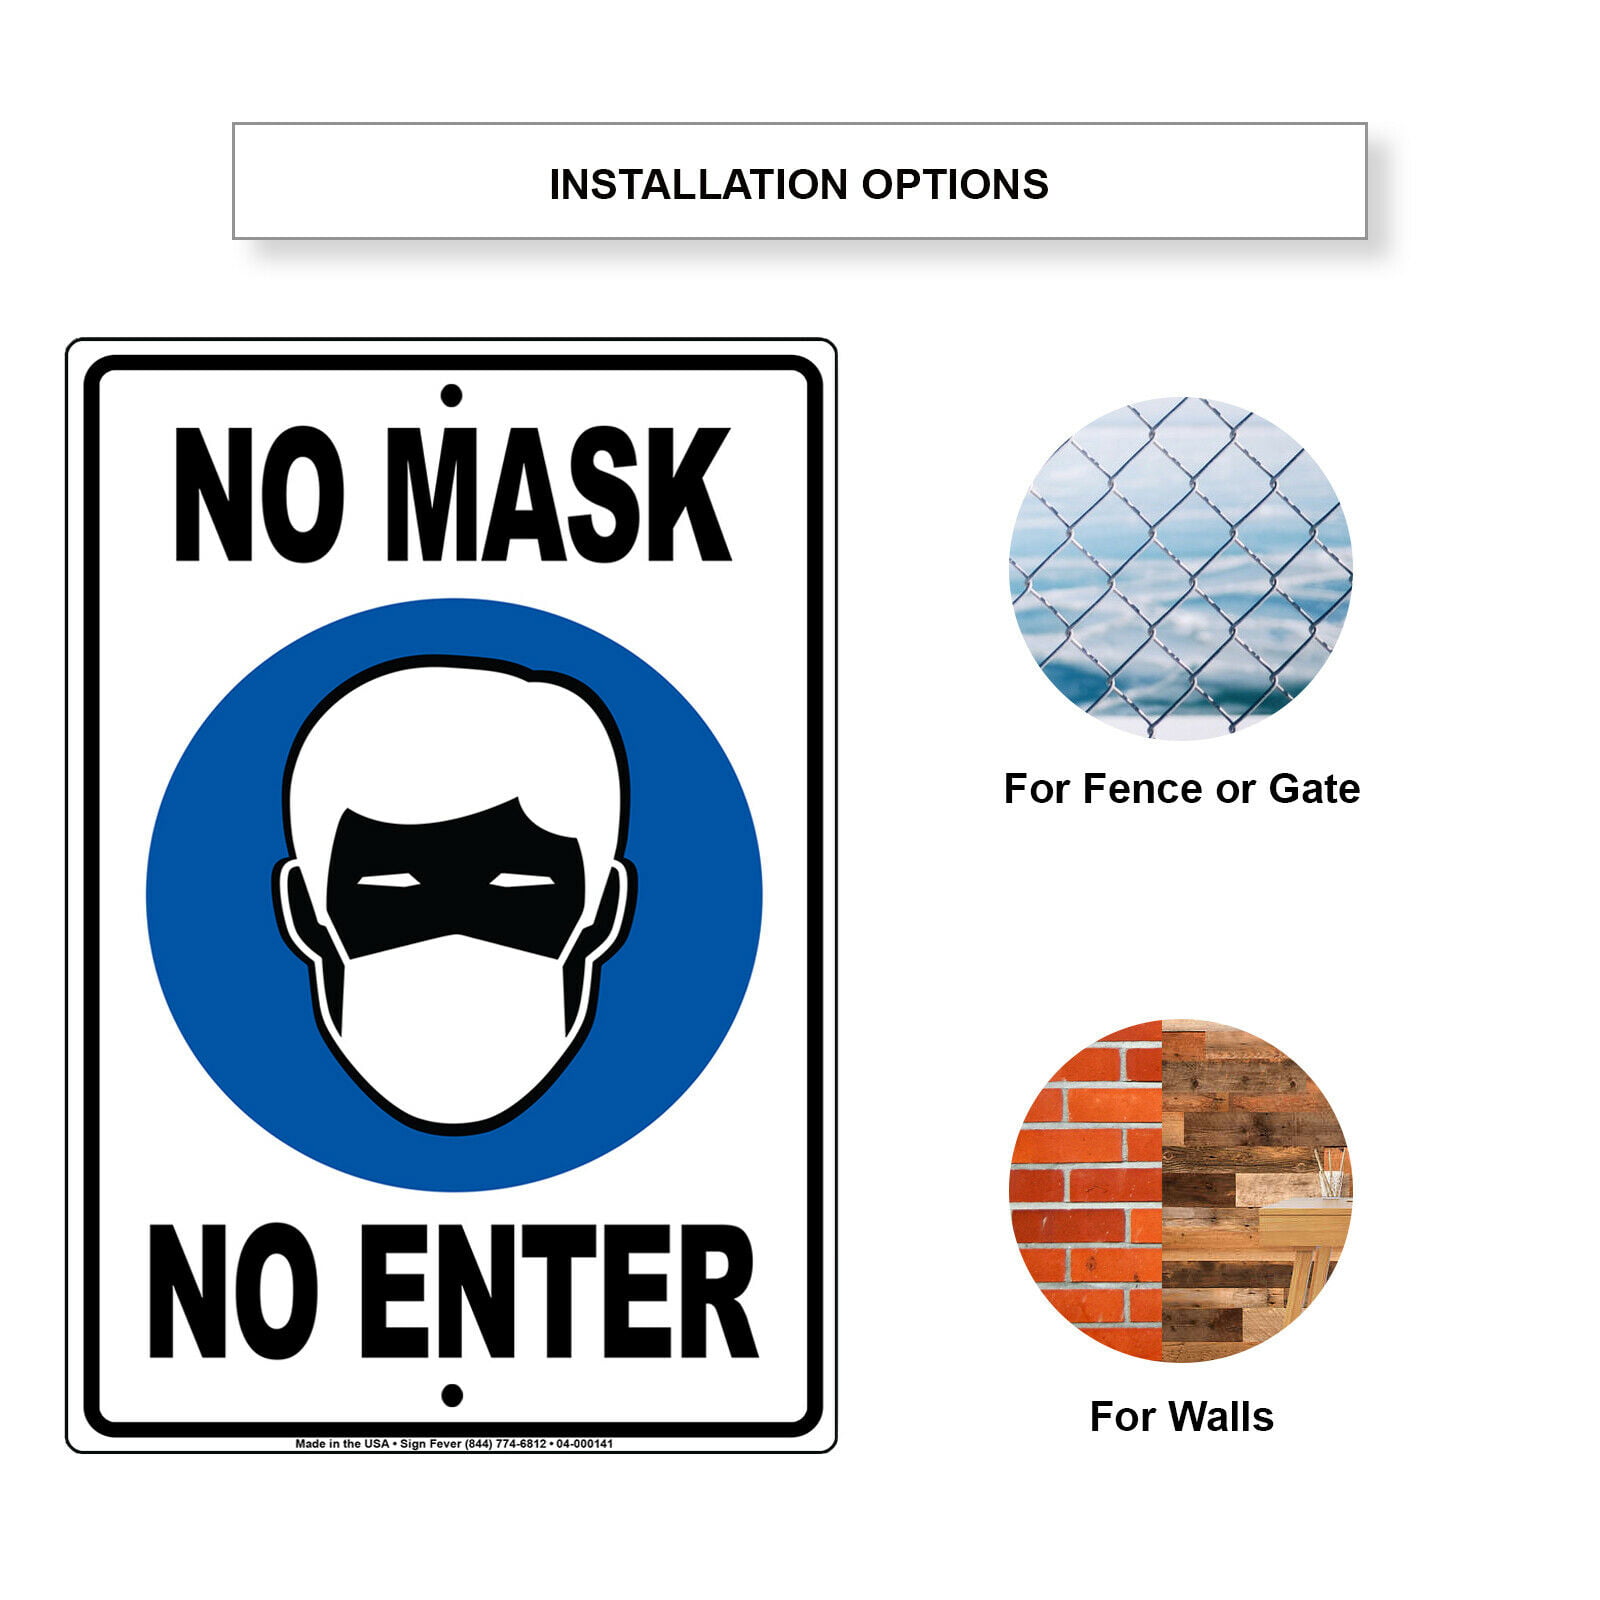 Caution Eye Protection Required Wall Art Novelty Notice Aluminum Metal Sign 